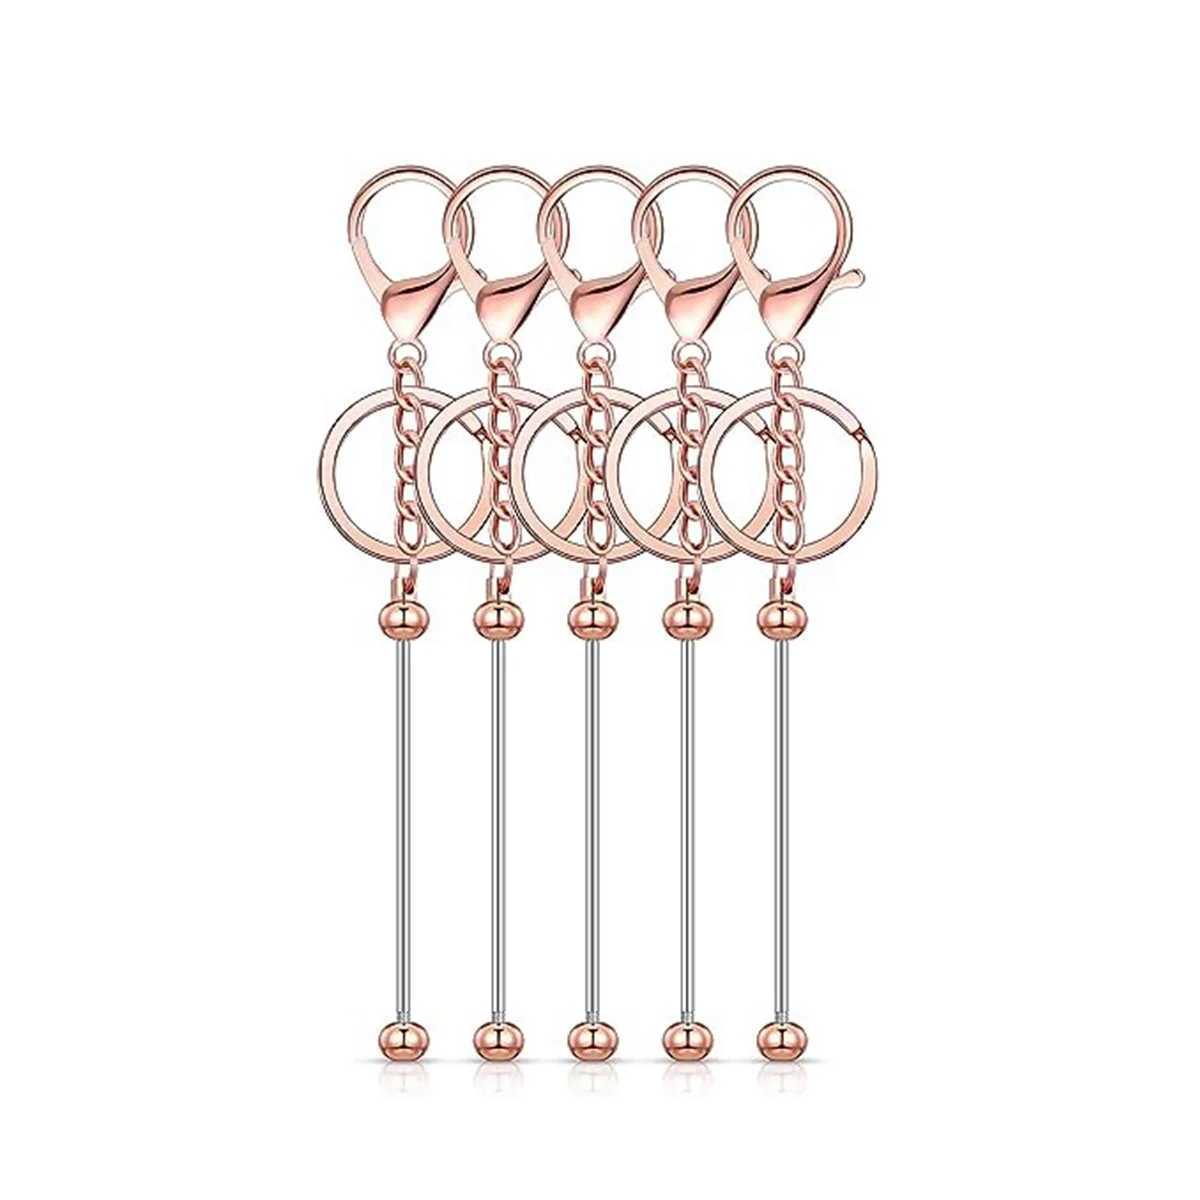 

6 Pcs Beadable Keychain Bars Blanks Bead Keychain Metal Beaded Keychain for DIY Pendant Crafts Jewelry Making,Rose Gold